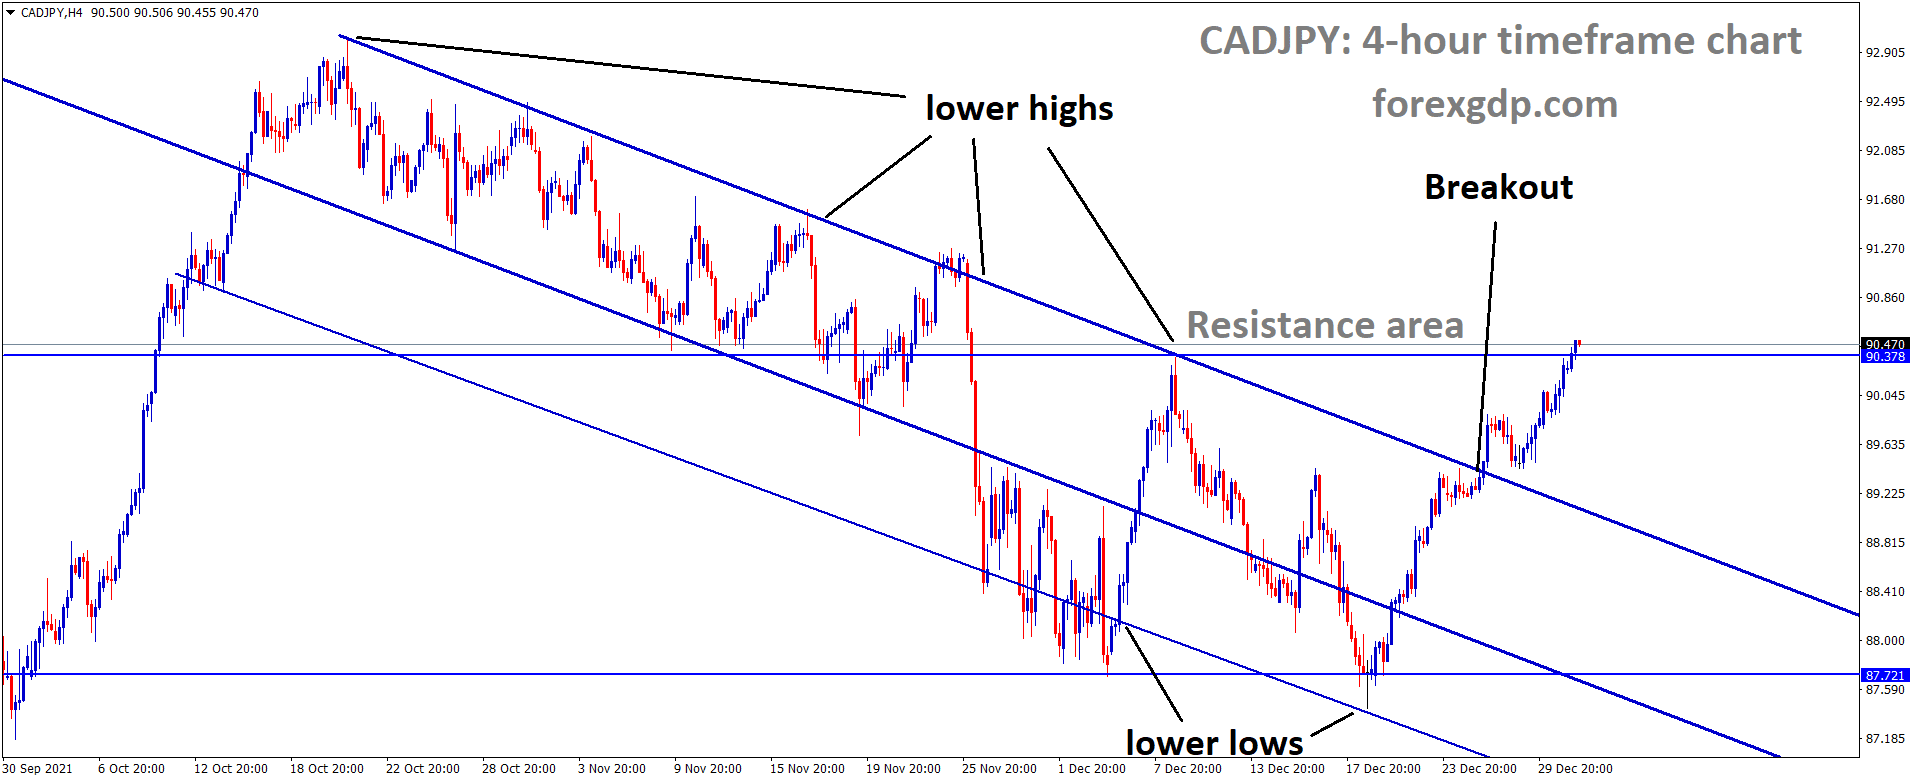 CADJPY has broken the Descending channel and the market has reached the horizontal resistance area.